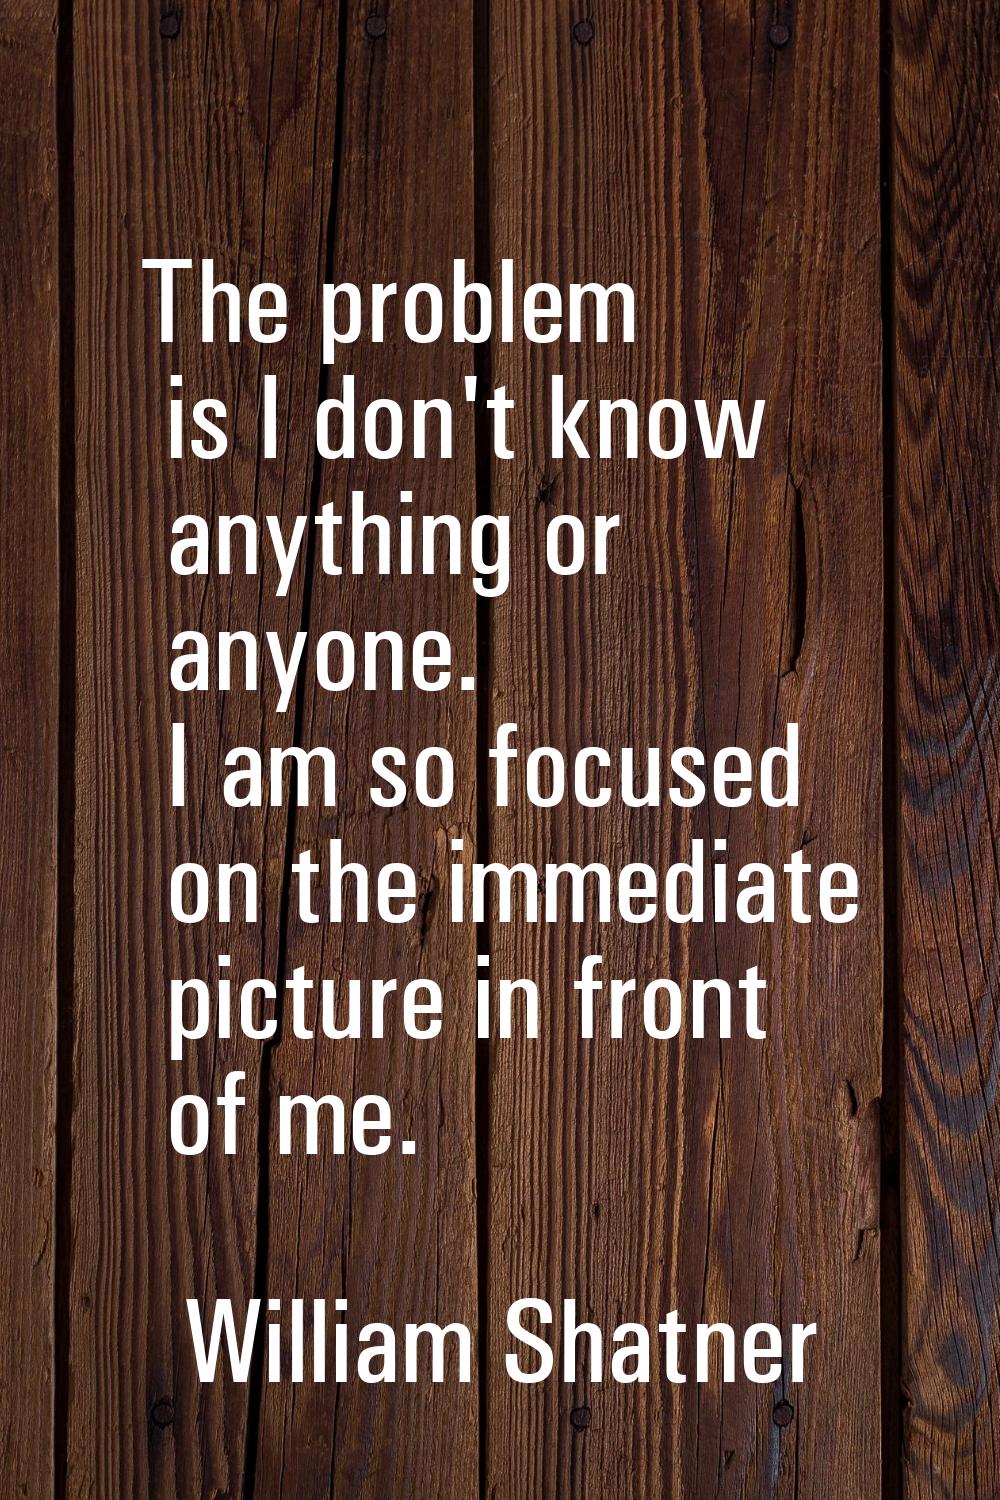 The problem is I don't know anything or anyone. I am so focused on the immediate picture in front o